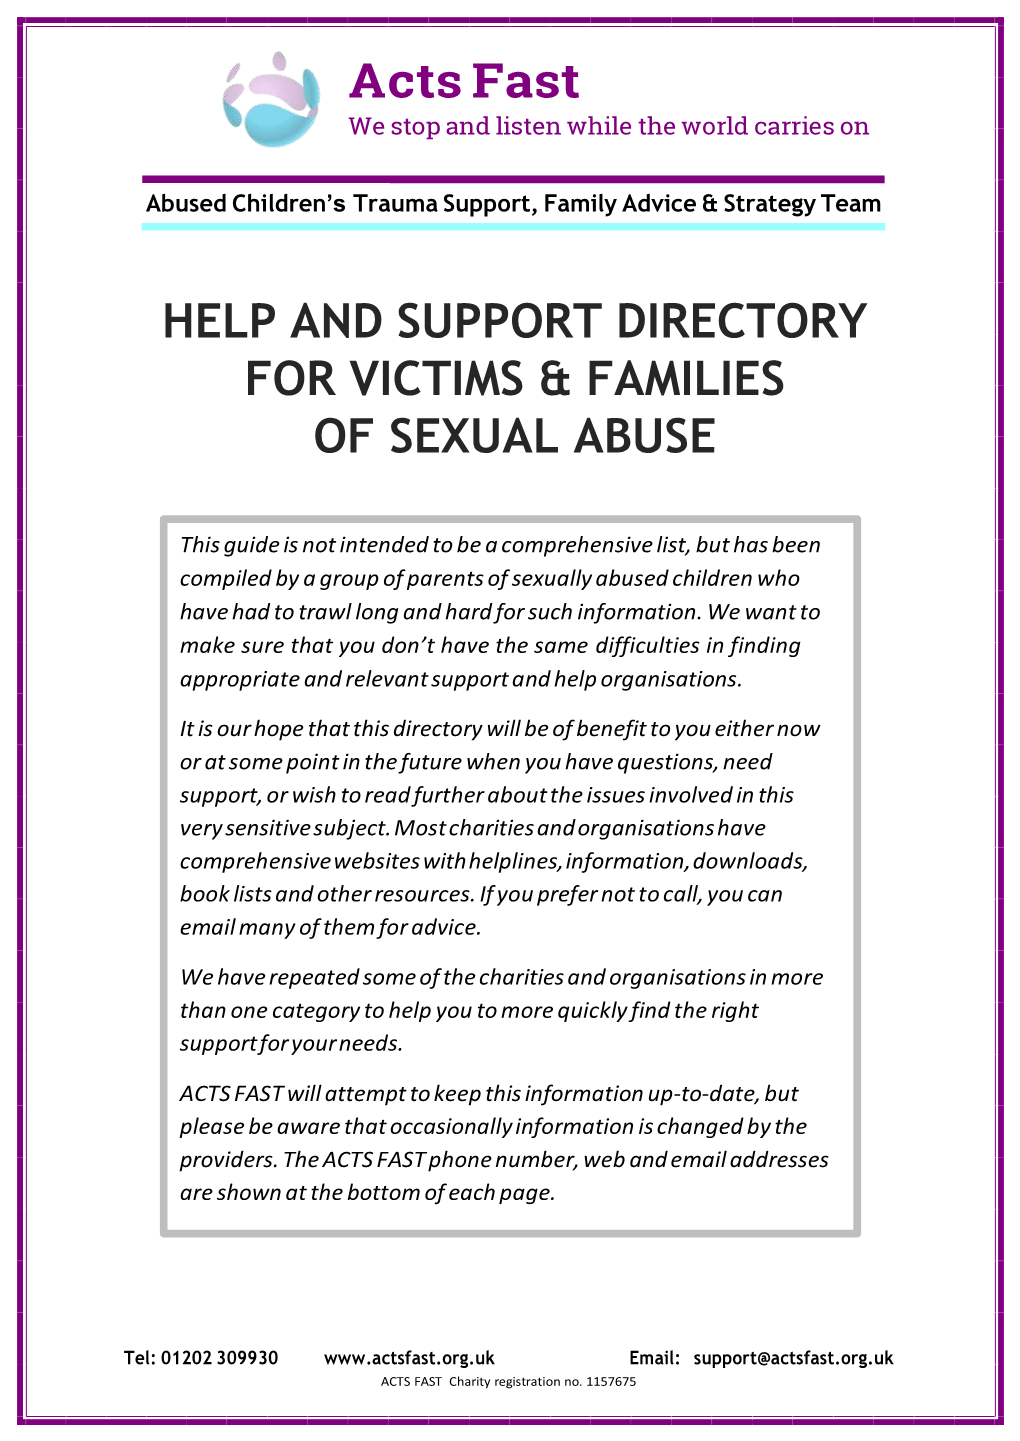 Acts Fast HELP and SUPPORT DIRECTORY for VICTIMS & FAMILIES of SEXUAL ABUSE